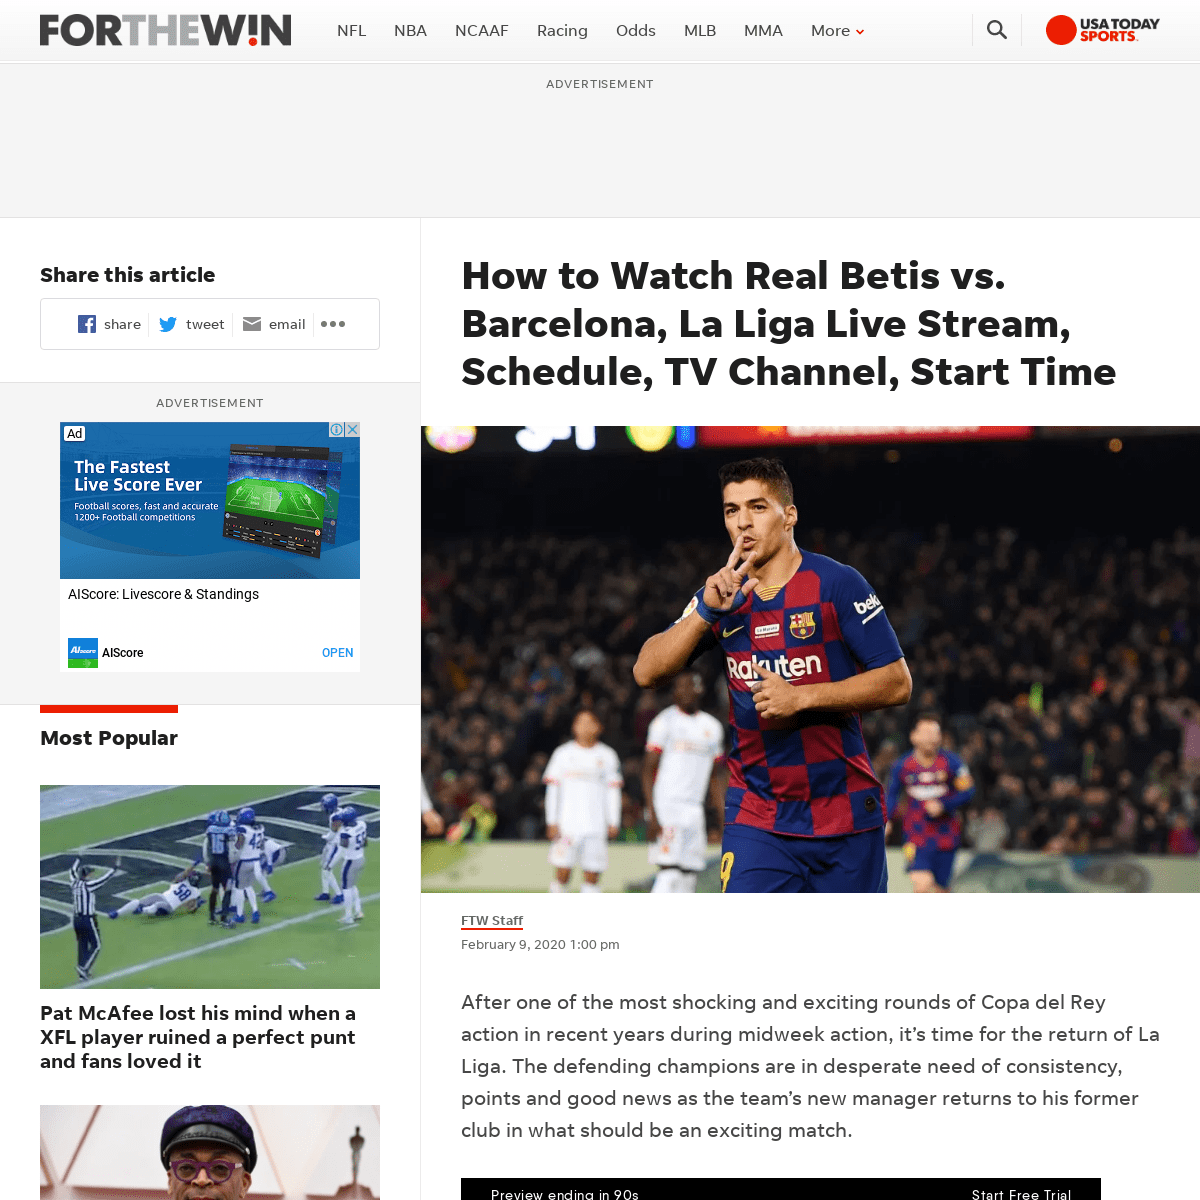 A complete backup of ftw.usatoday.com/2020/02/how-to-watch-real-betis-vs-barcelona-la-liga-live-stream-schedule-tv-channel-start